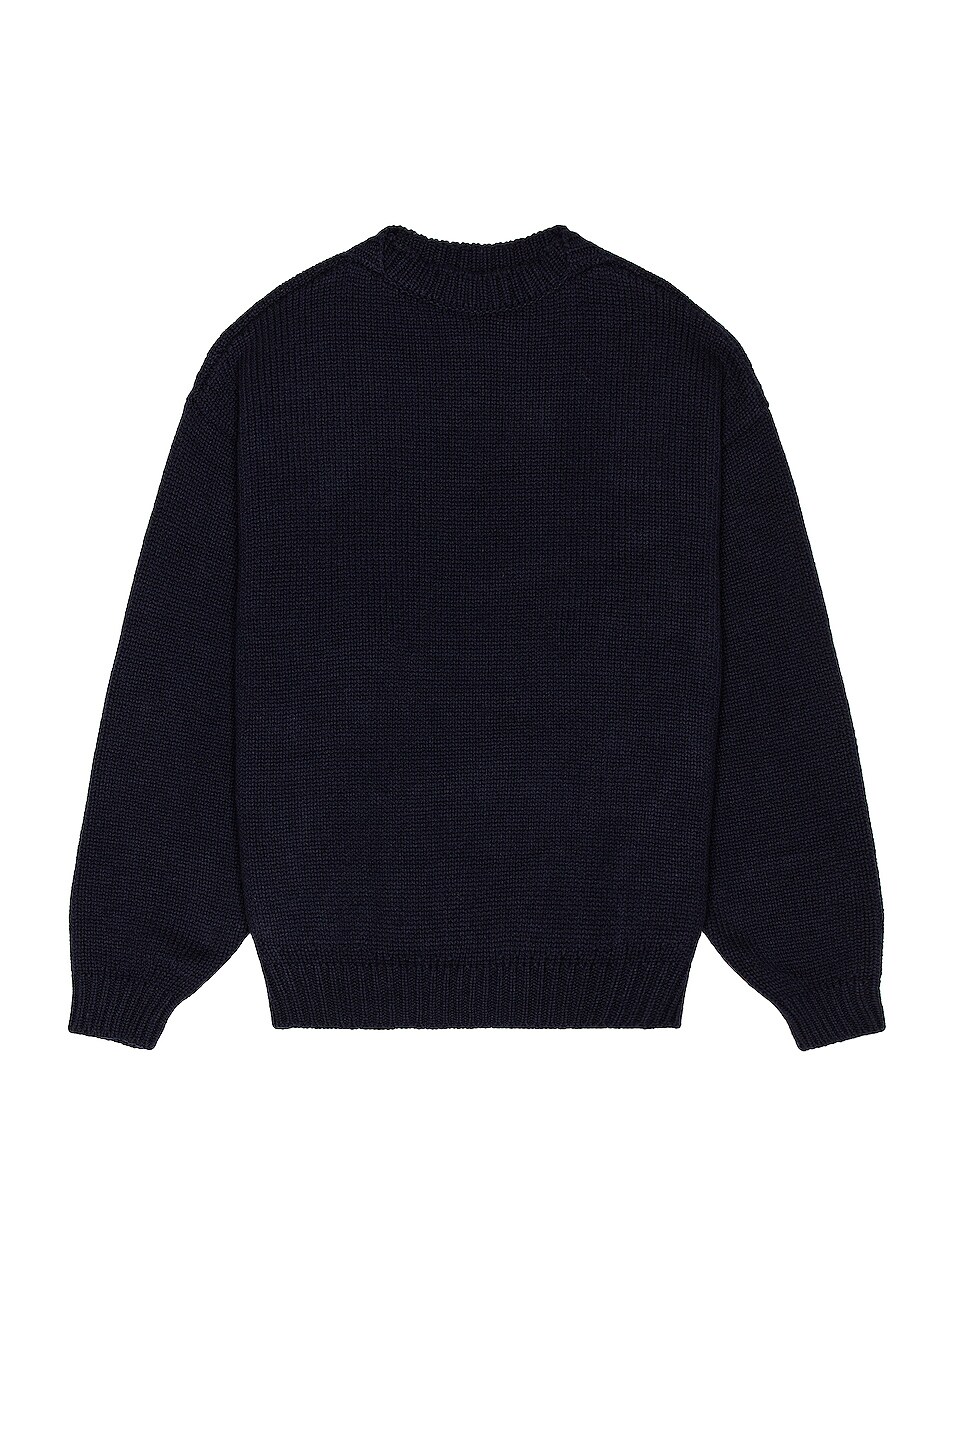 Image 1 of Fear of God Overlap Wool Sweater in Navy